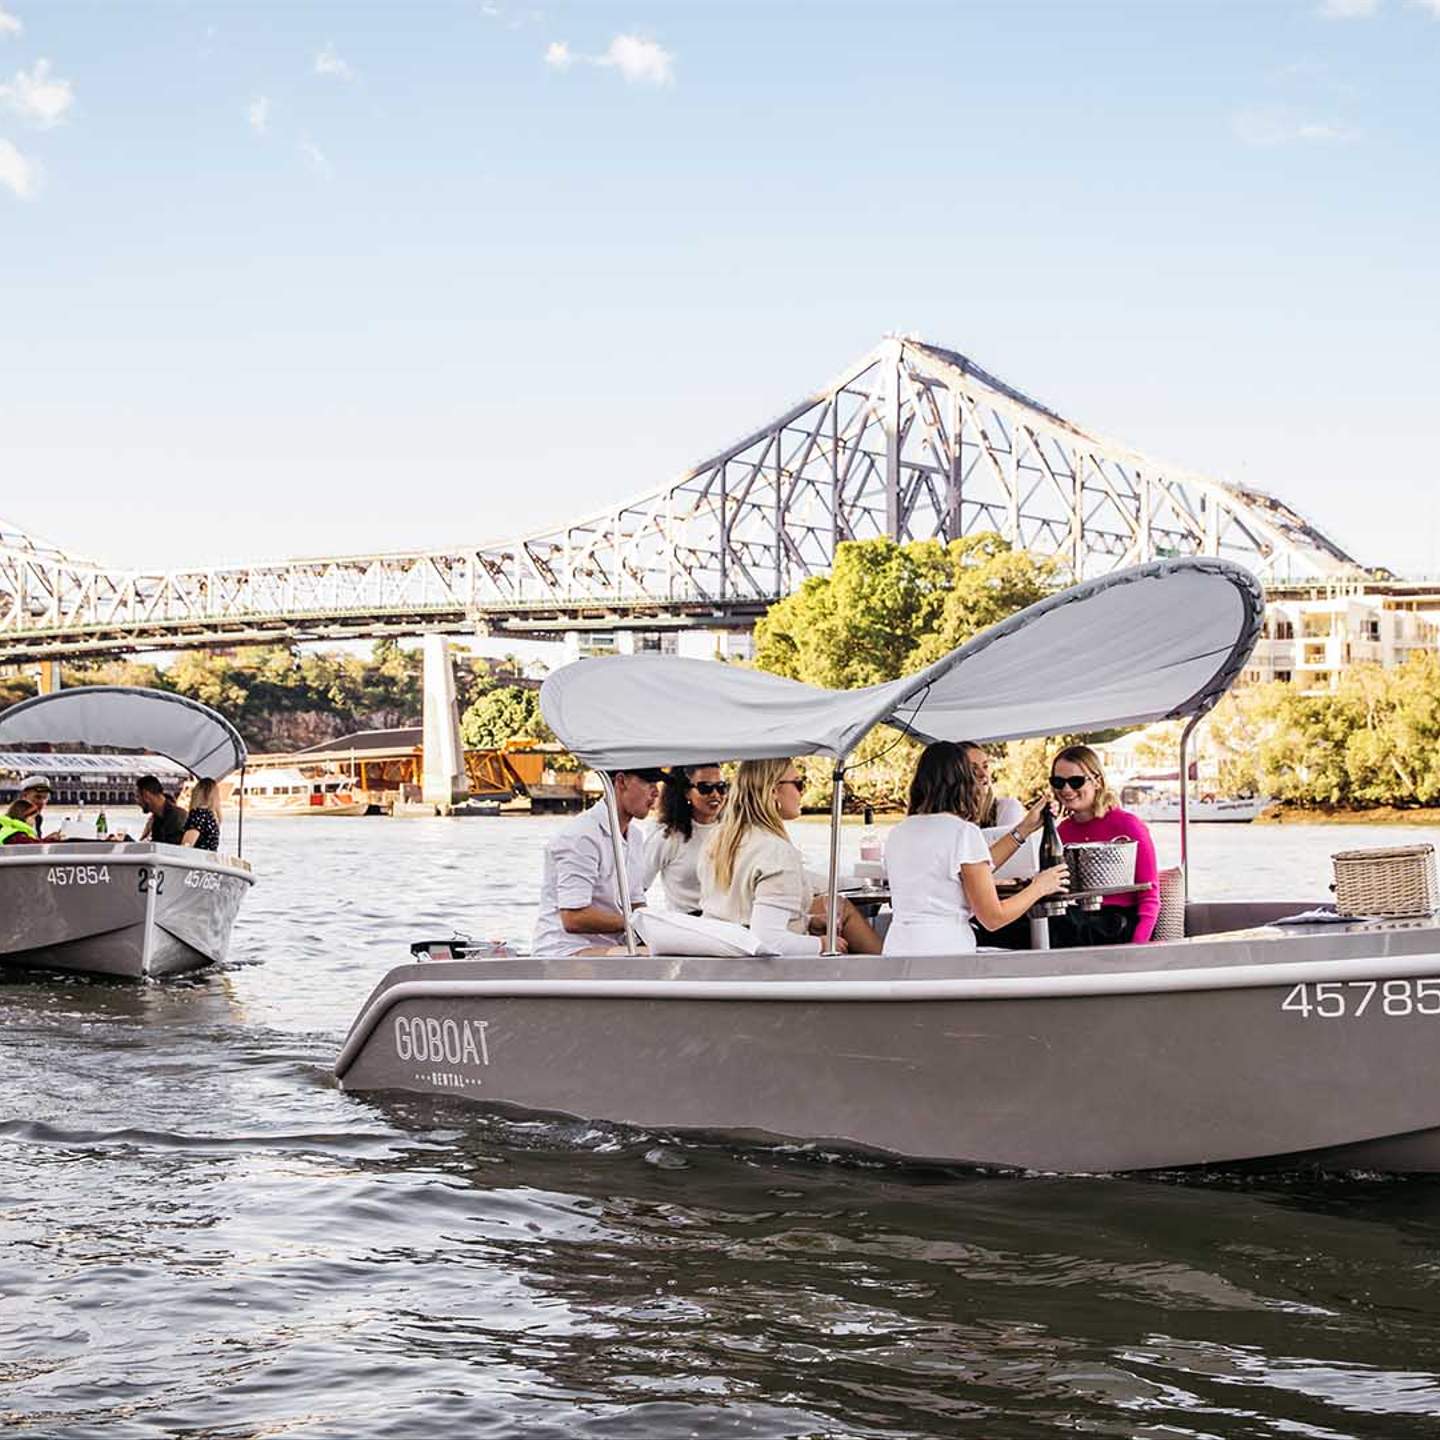 Brisbane's New Pet-Friendly BYO Picnic Boats Are Popping Up in